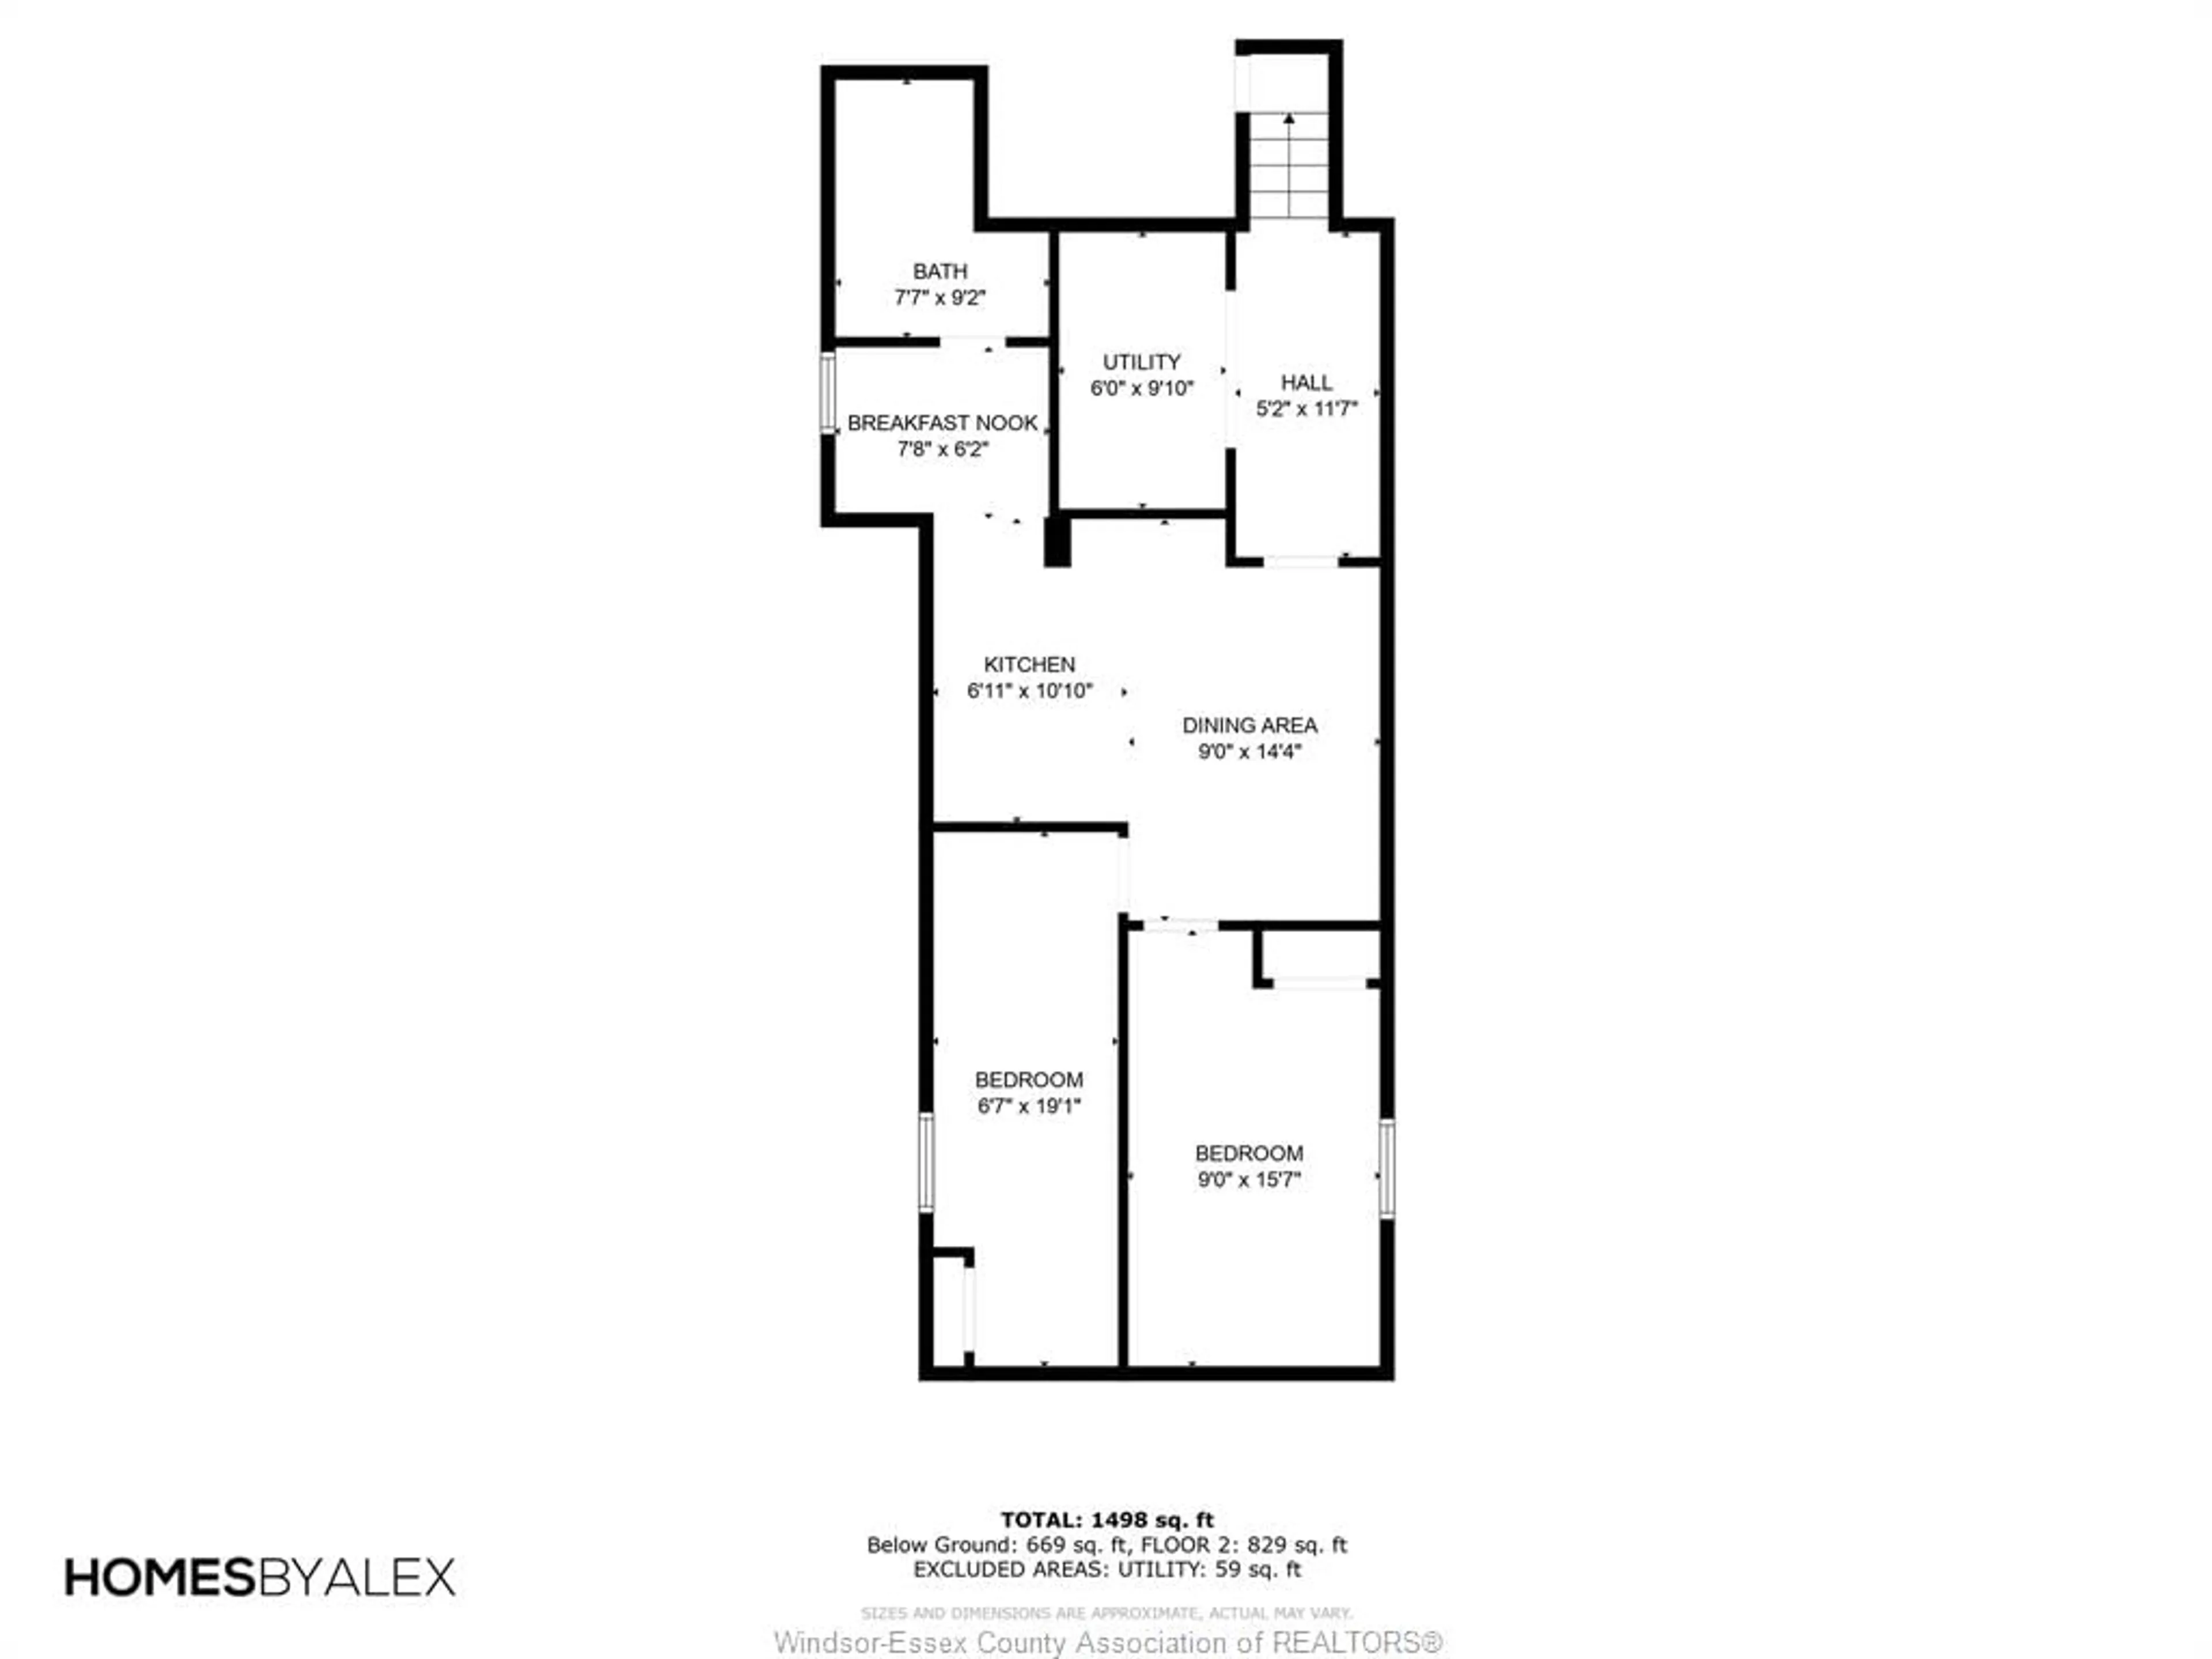 Floor plan for 764 PARENT Ave, Windsor Ontario N9A 2C7